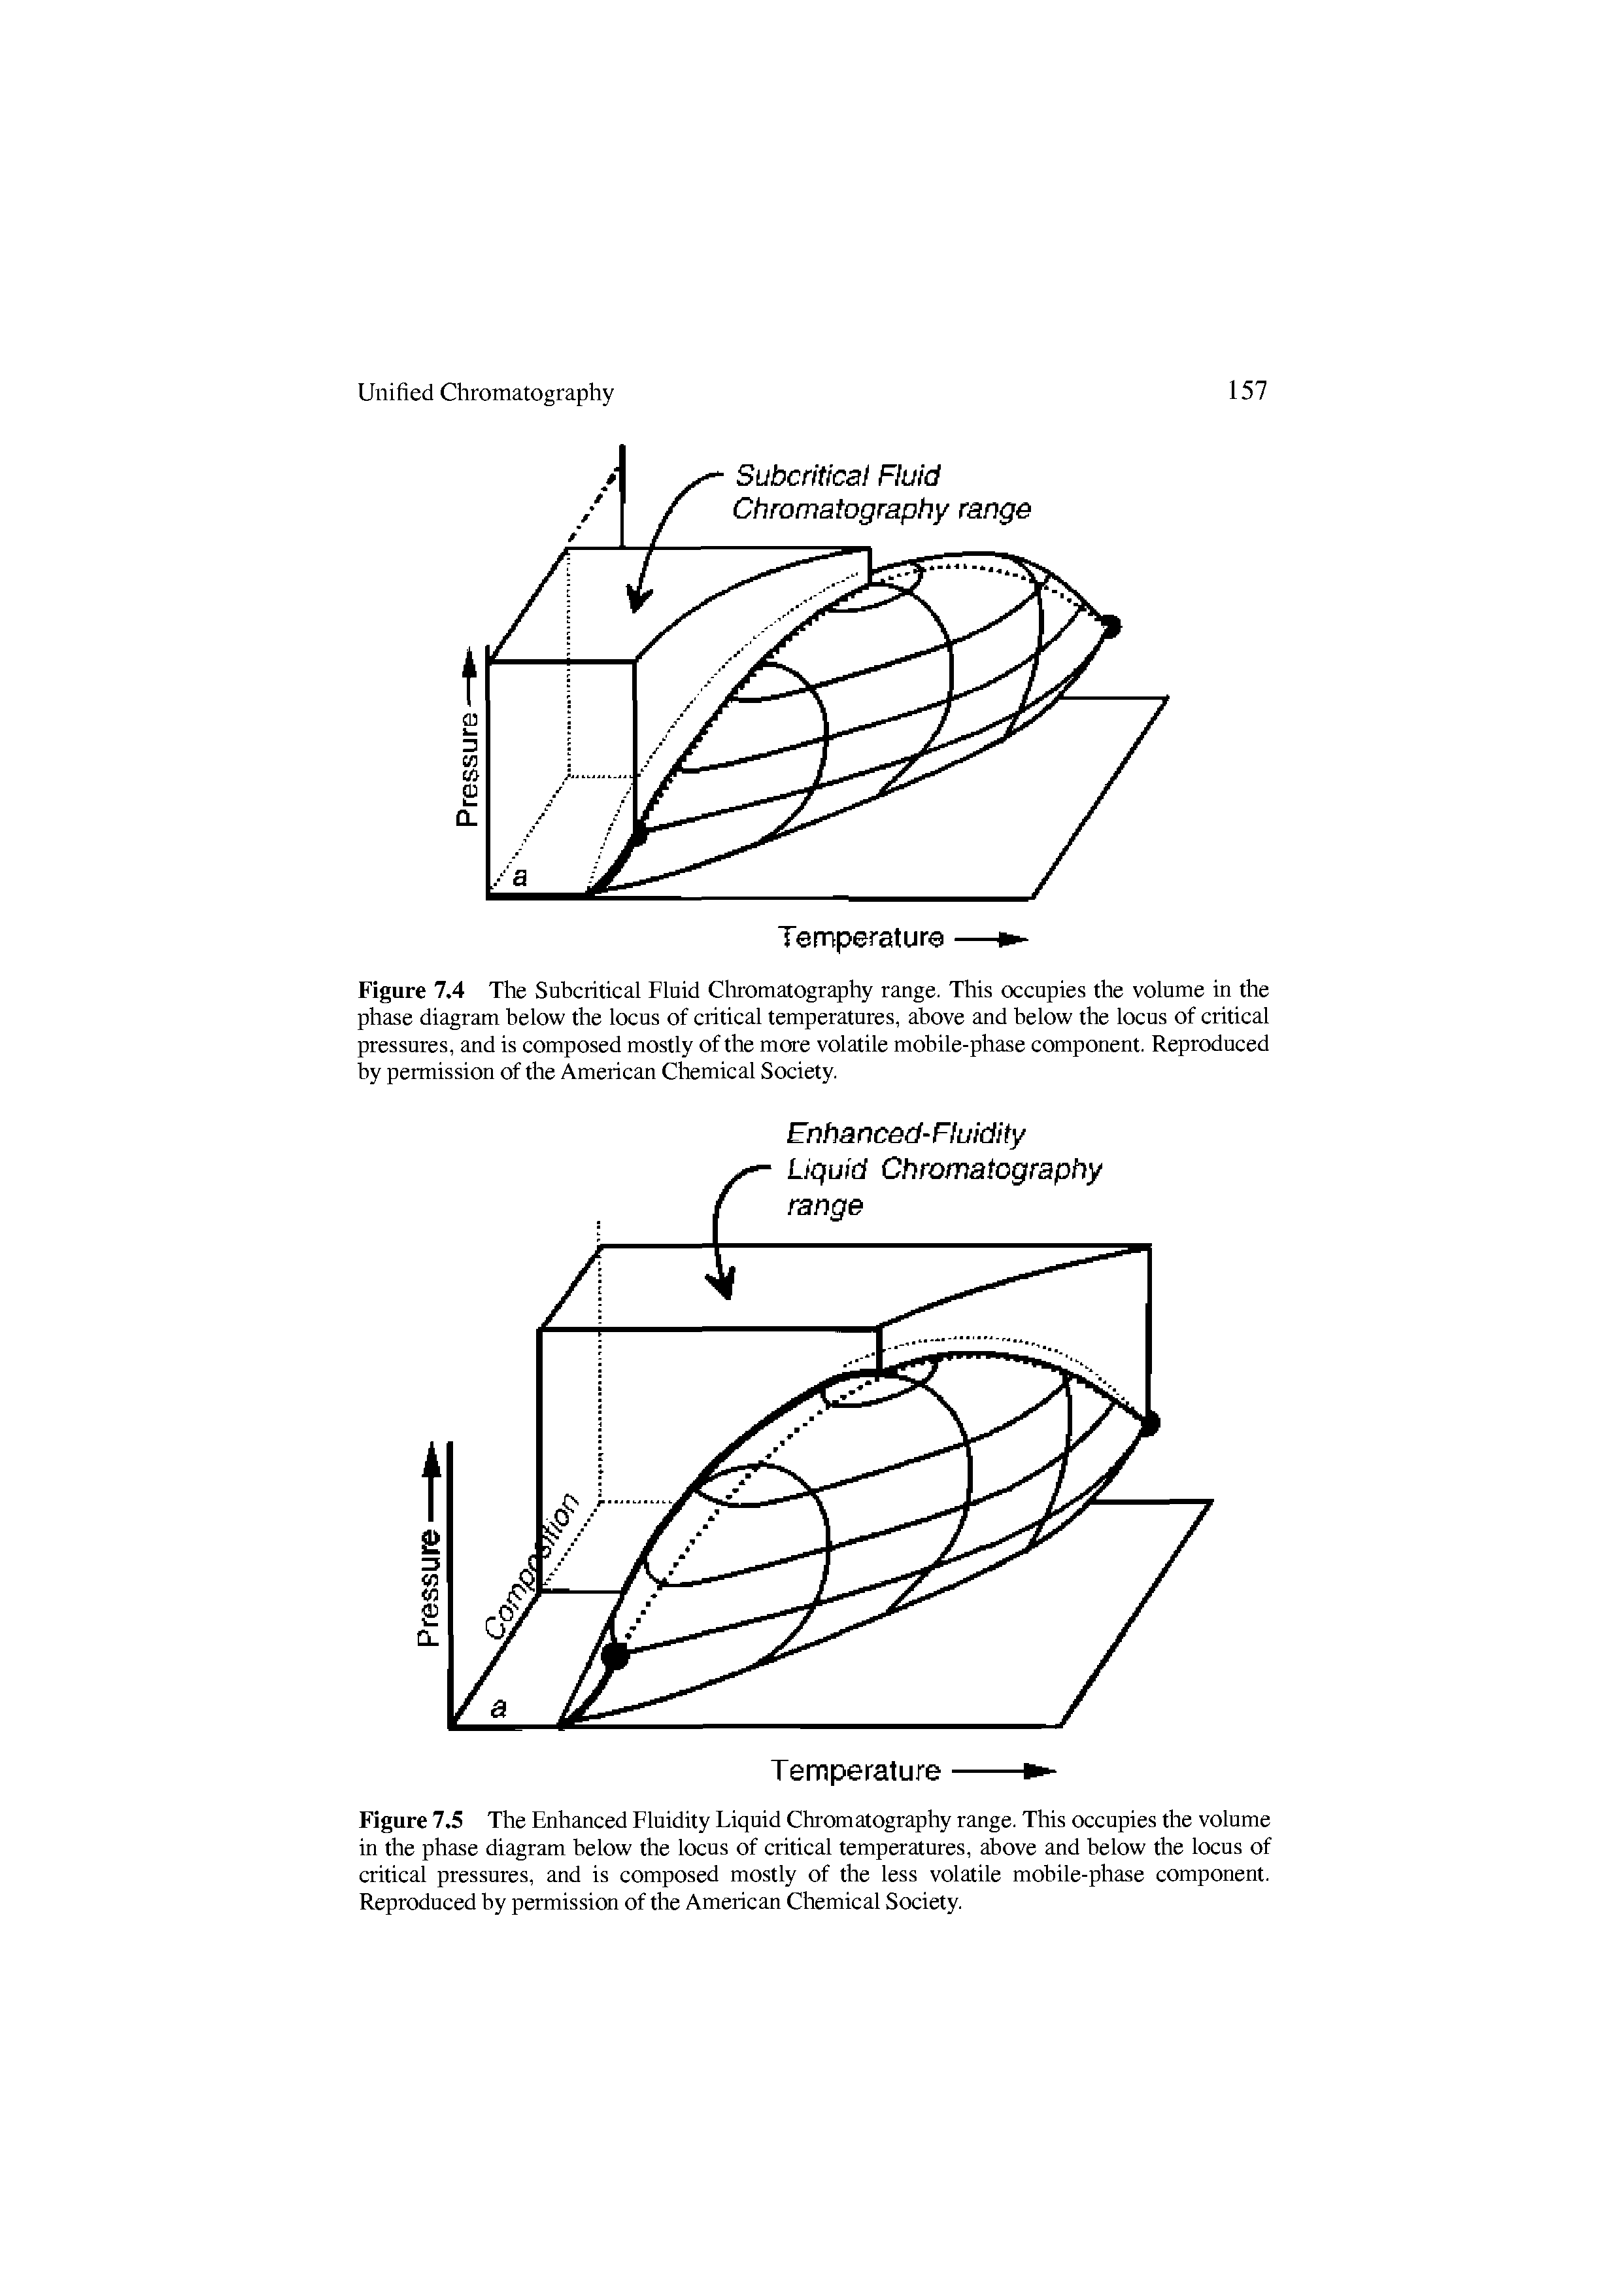 Figure 7.5 The Enhanced Fluidity Liquid Chromatography range. This occupies the volume in the phase diagram below the locus of critical temperatures, above and below the locus of critical pressures, and is composed mostly of the less volatile mobile-phase component. Reproduced by permission of the American Chemical Society.